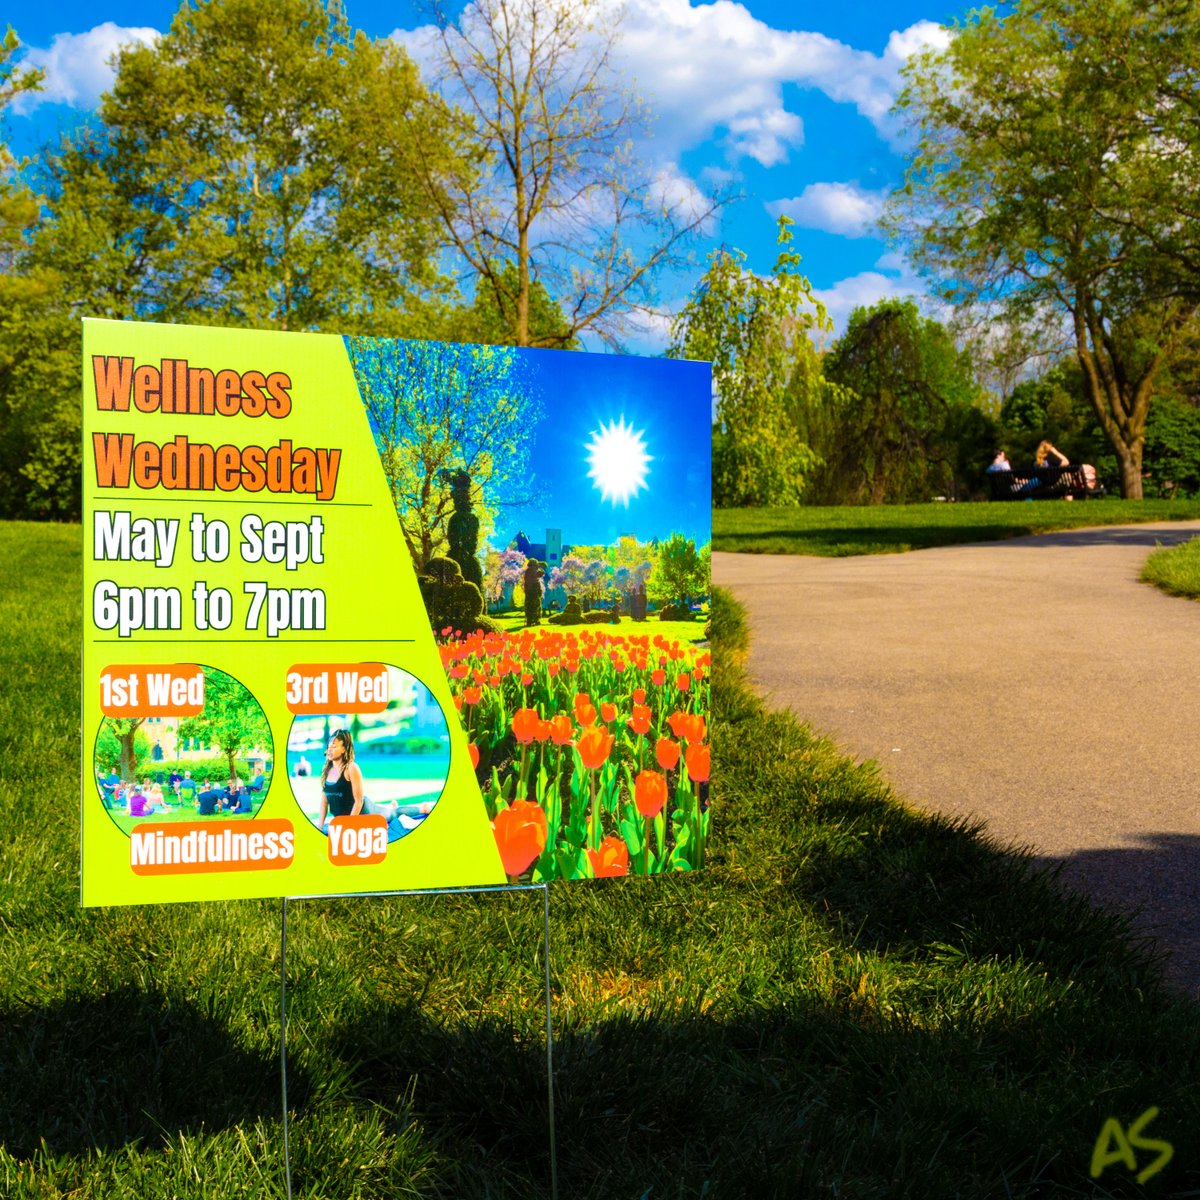 You might recognize my photo, Wellness Wednesdays are back at our neighborhood Topiary Park tonight. Mindfulness sessions, led by my super cool neighbor Daron Larson! Free event, 6-7pm. 🌳💕🧘‍♂️💕🌳 #wellness #meditation